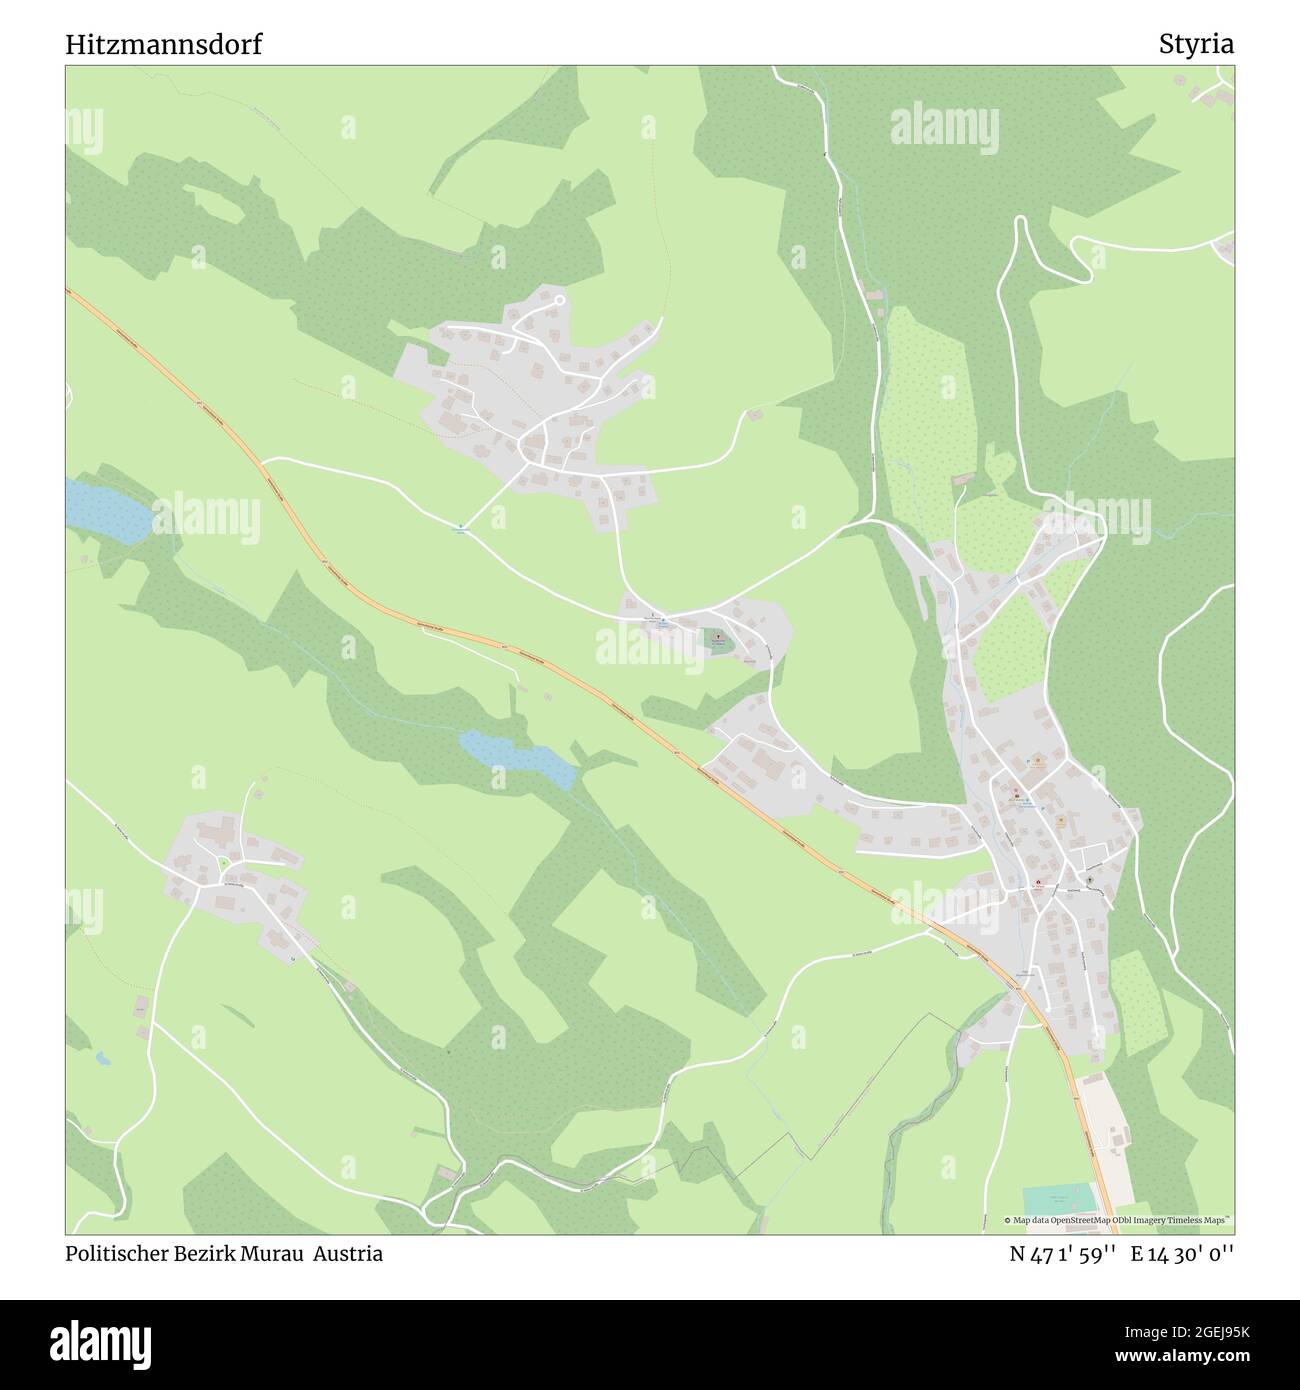 Hitzmannsdorf, Politischer Bezirk Murau, Austria, Styria, N 47 1' 59'', E 14 30' 0'', map, Timeless Map published in 2021. Travelers, explorers and adventurers like Florence Nightingale, David Livingstone, Ernest Shackleton, Lewis and Clark and Sherlock Holmes relied on maps to plan travels to the world's most remote corners, Timeless Maps is mapping most locations on the globe, showing the achievement of great dreams Stock Photo